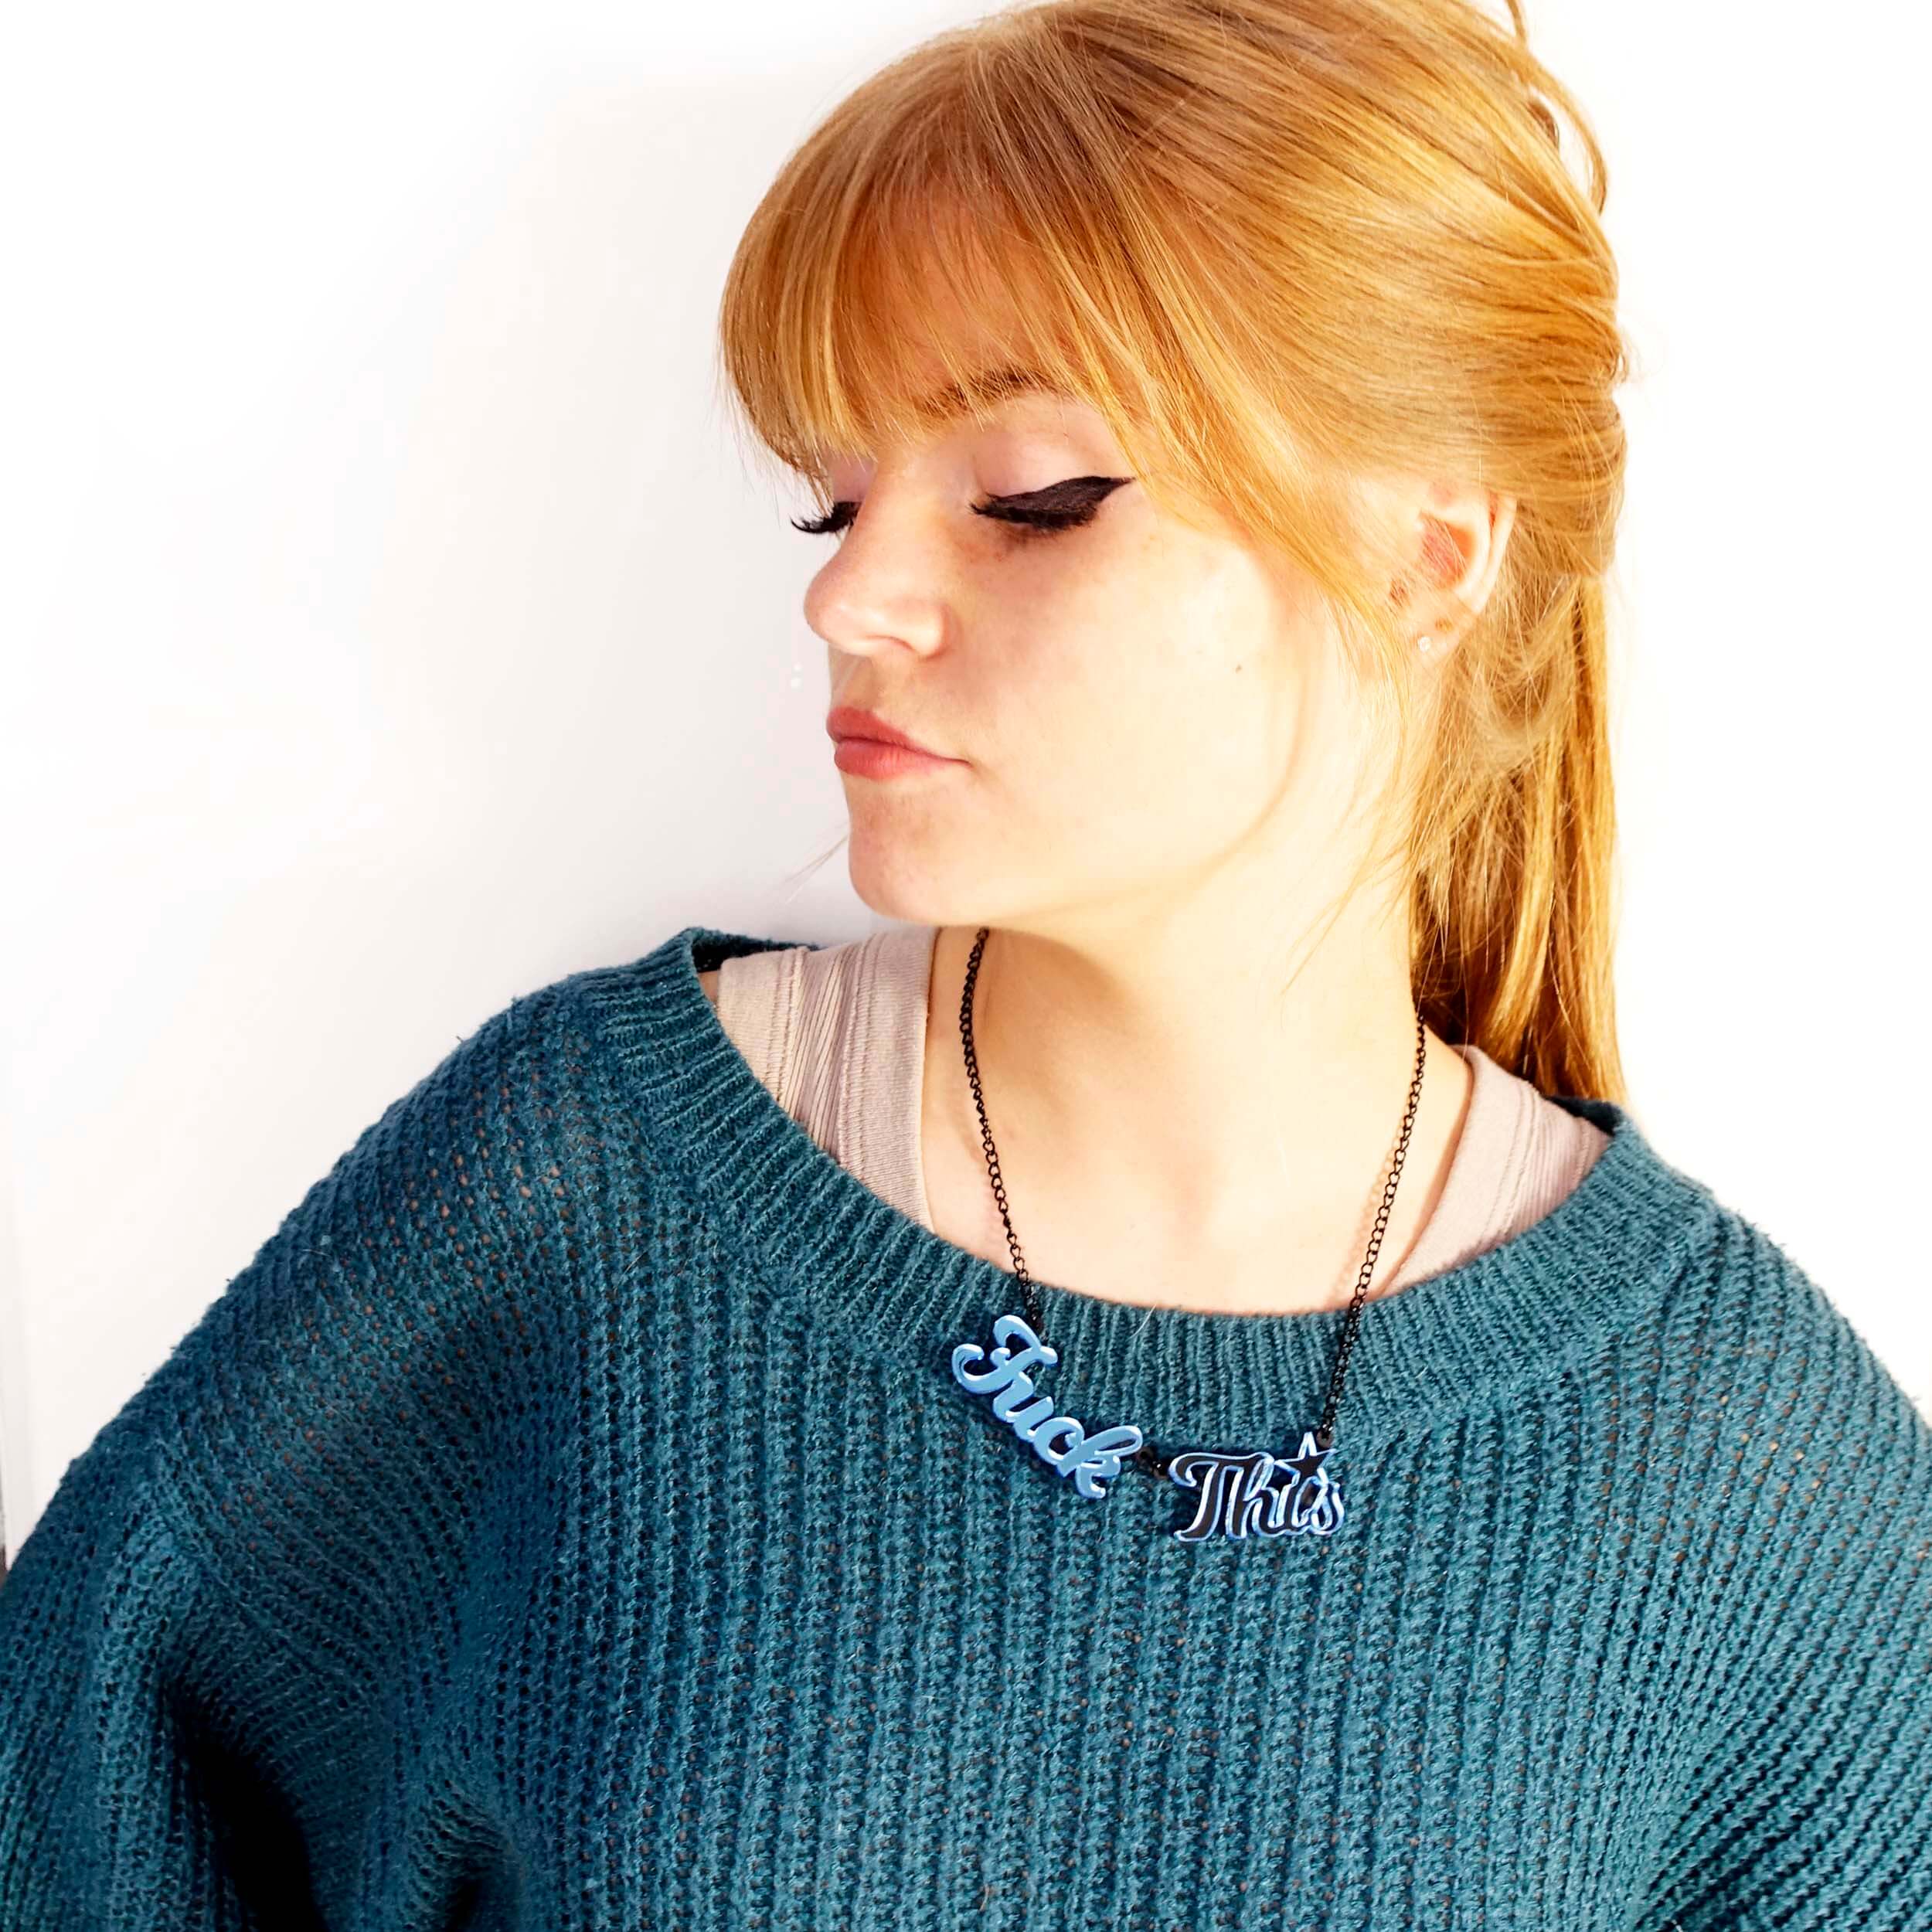 Eliza wears a Sky blue mirror F*ck This necklace designed by Sarah Day for Wear and Resist. 